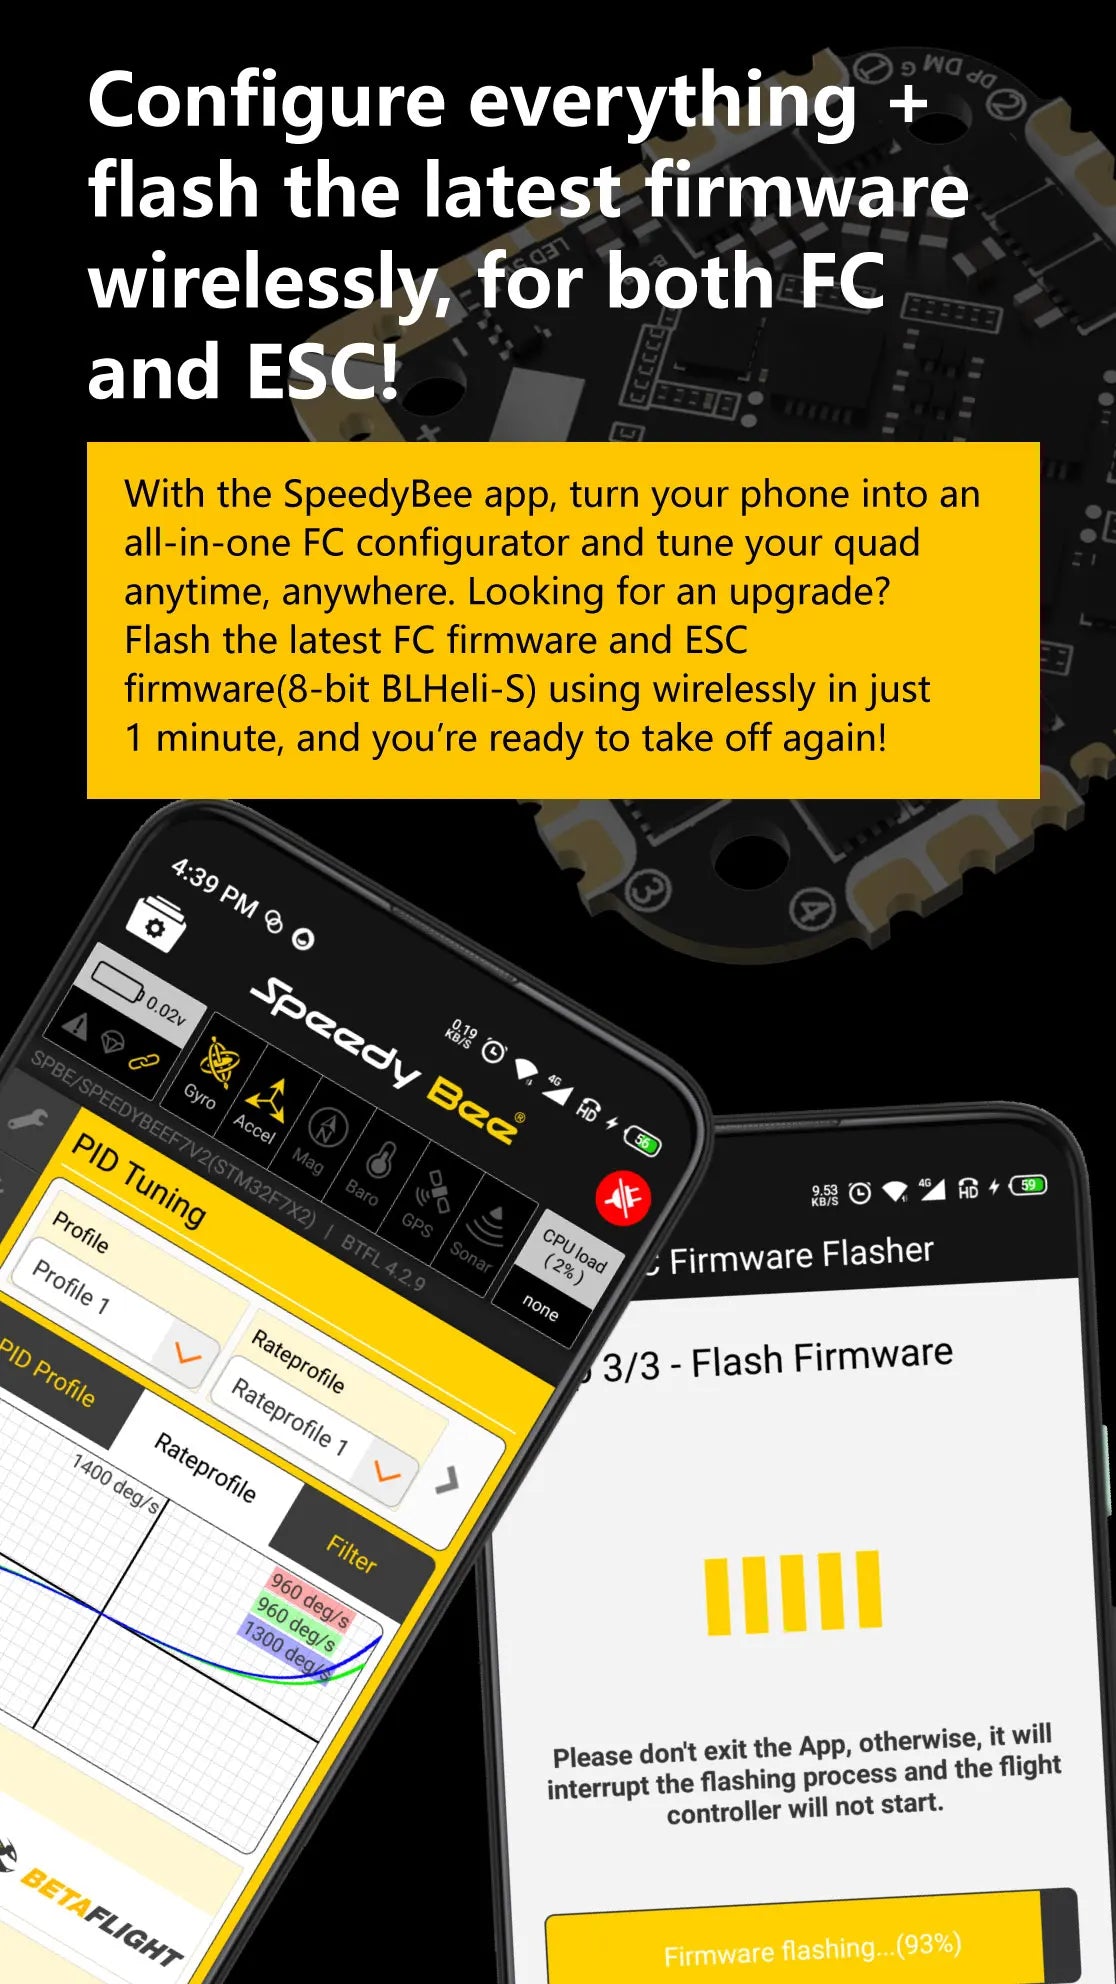 flash the latest FC and ESCI firmware wirelessly in just 1 minute . turn your